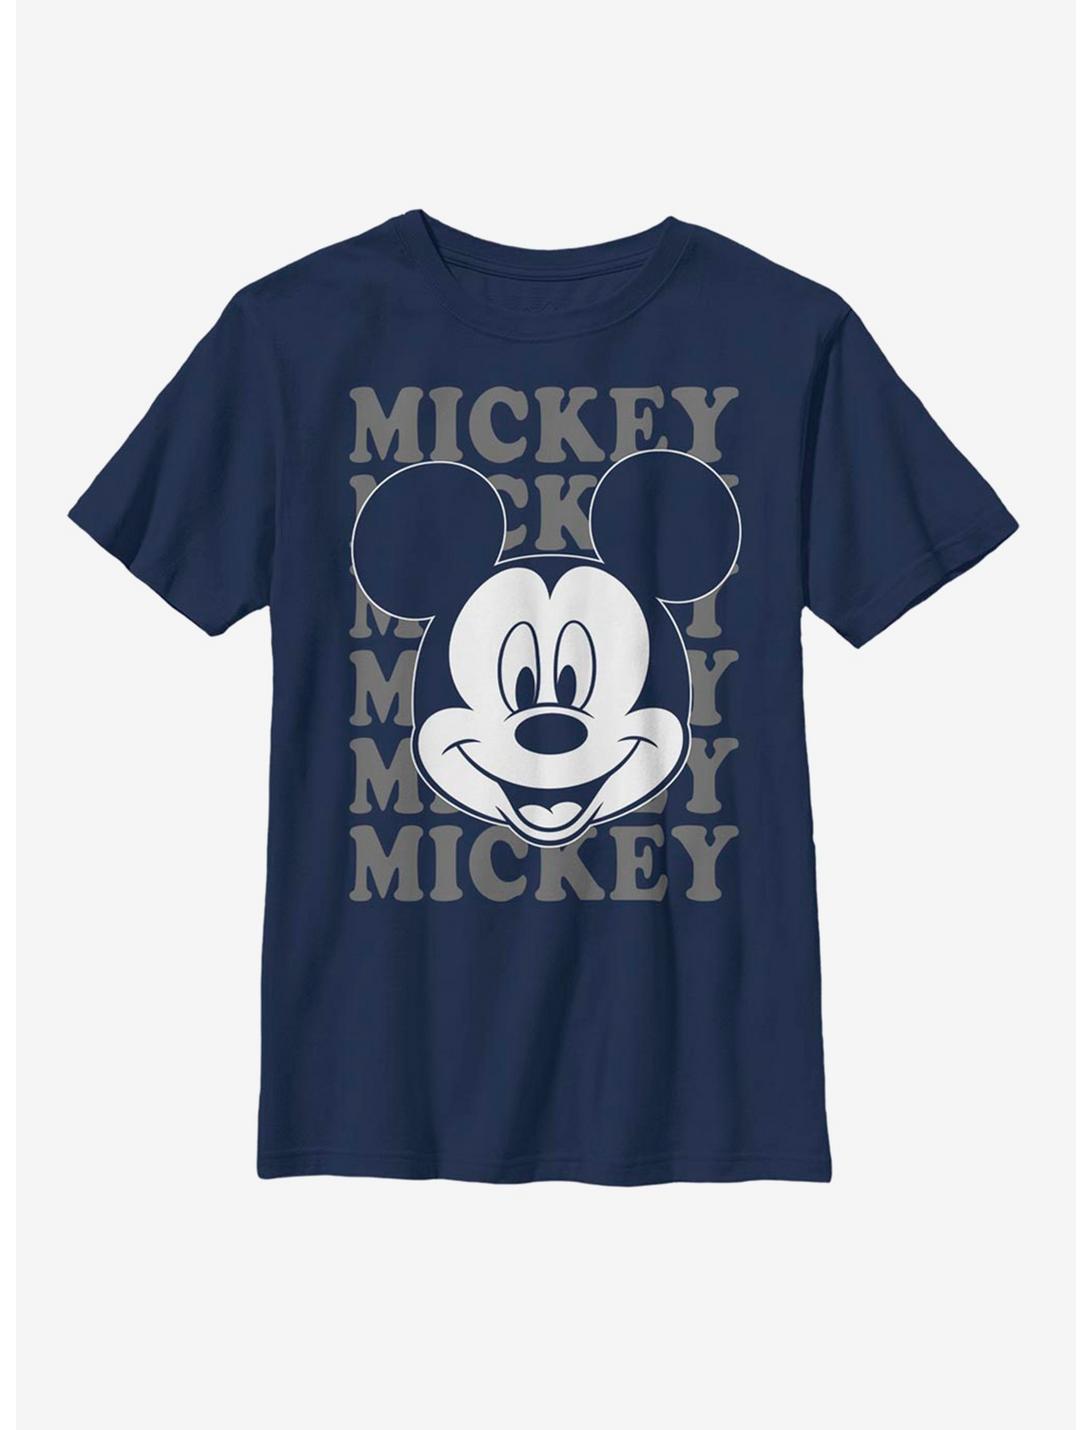 Disney Mickey Mouse All Name Youth T-Shirt, NAVY, hi-res